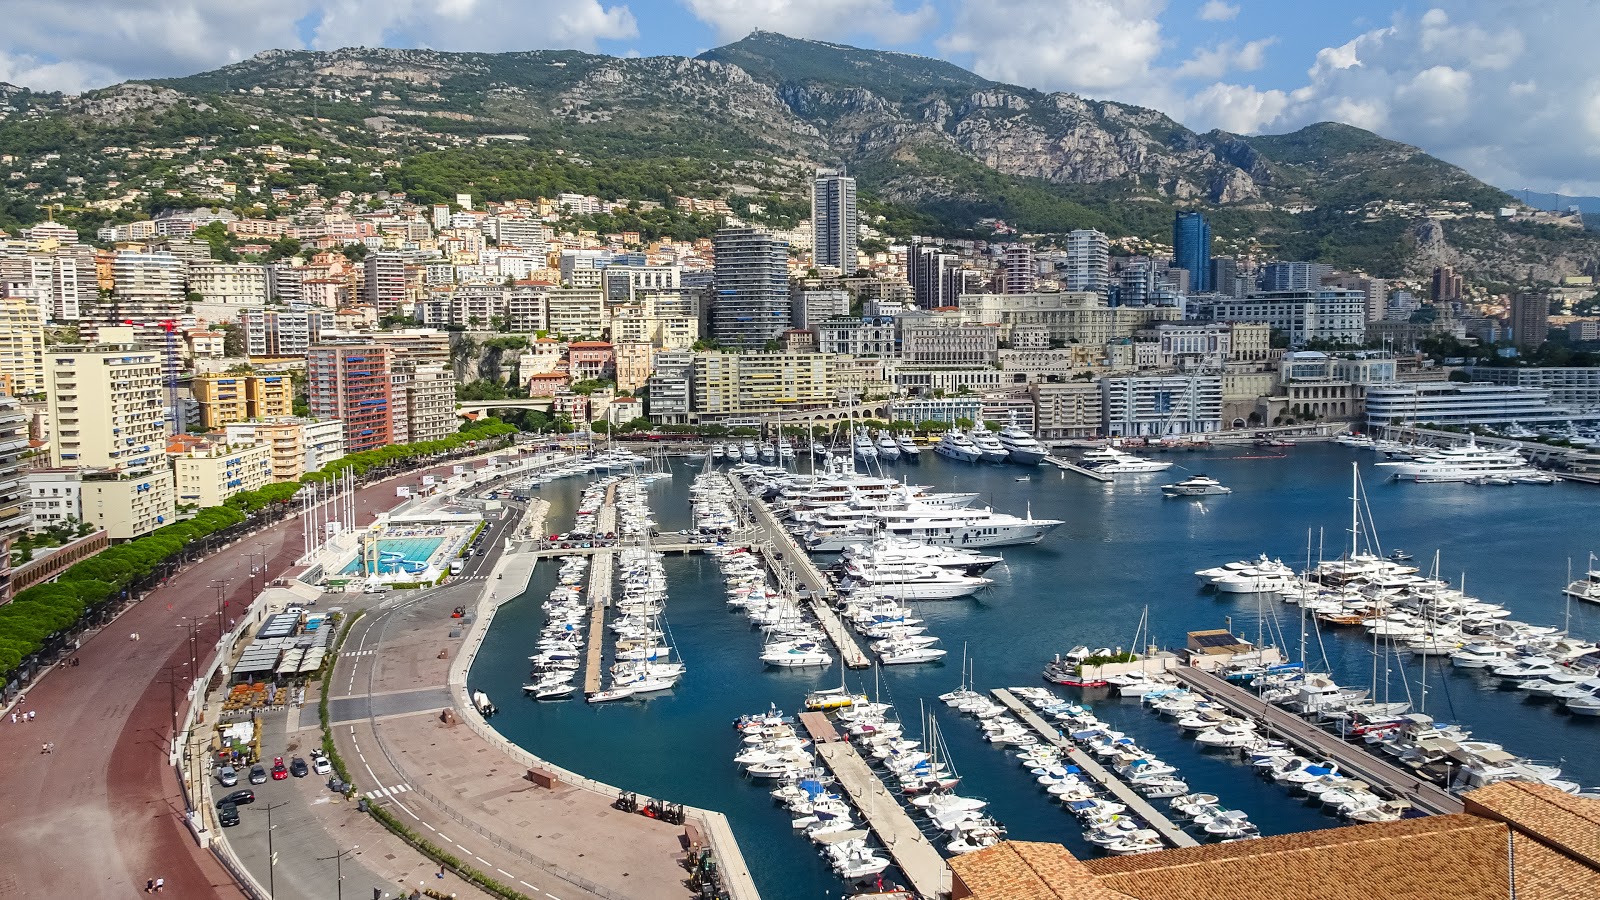 Monaco - One day in the 2nd smallest country - Sven's Travel Venues